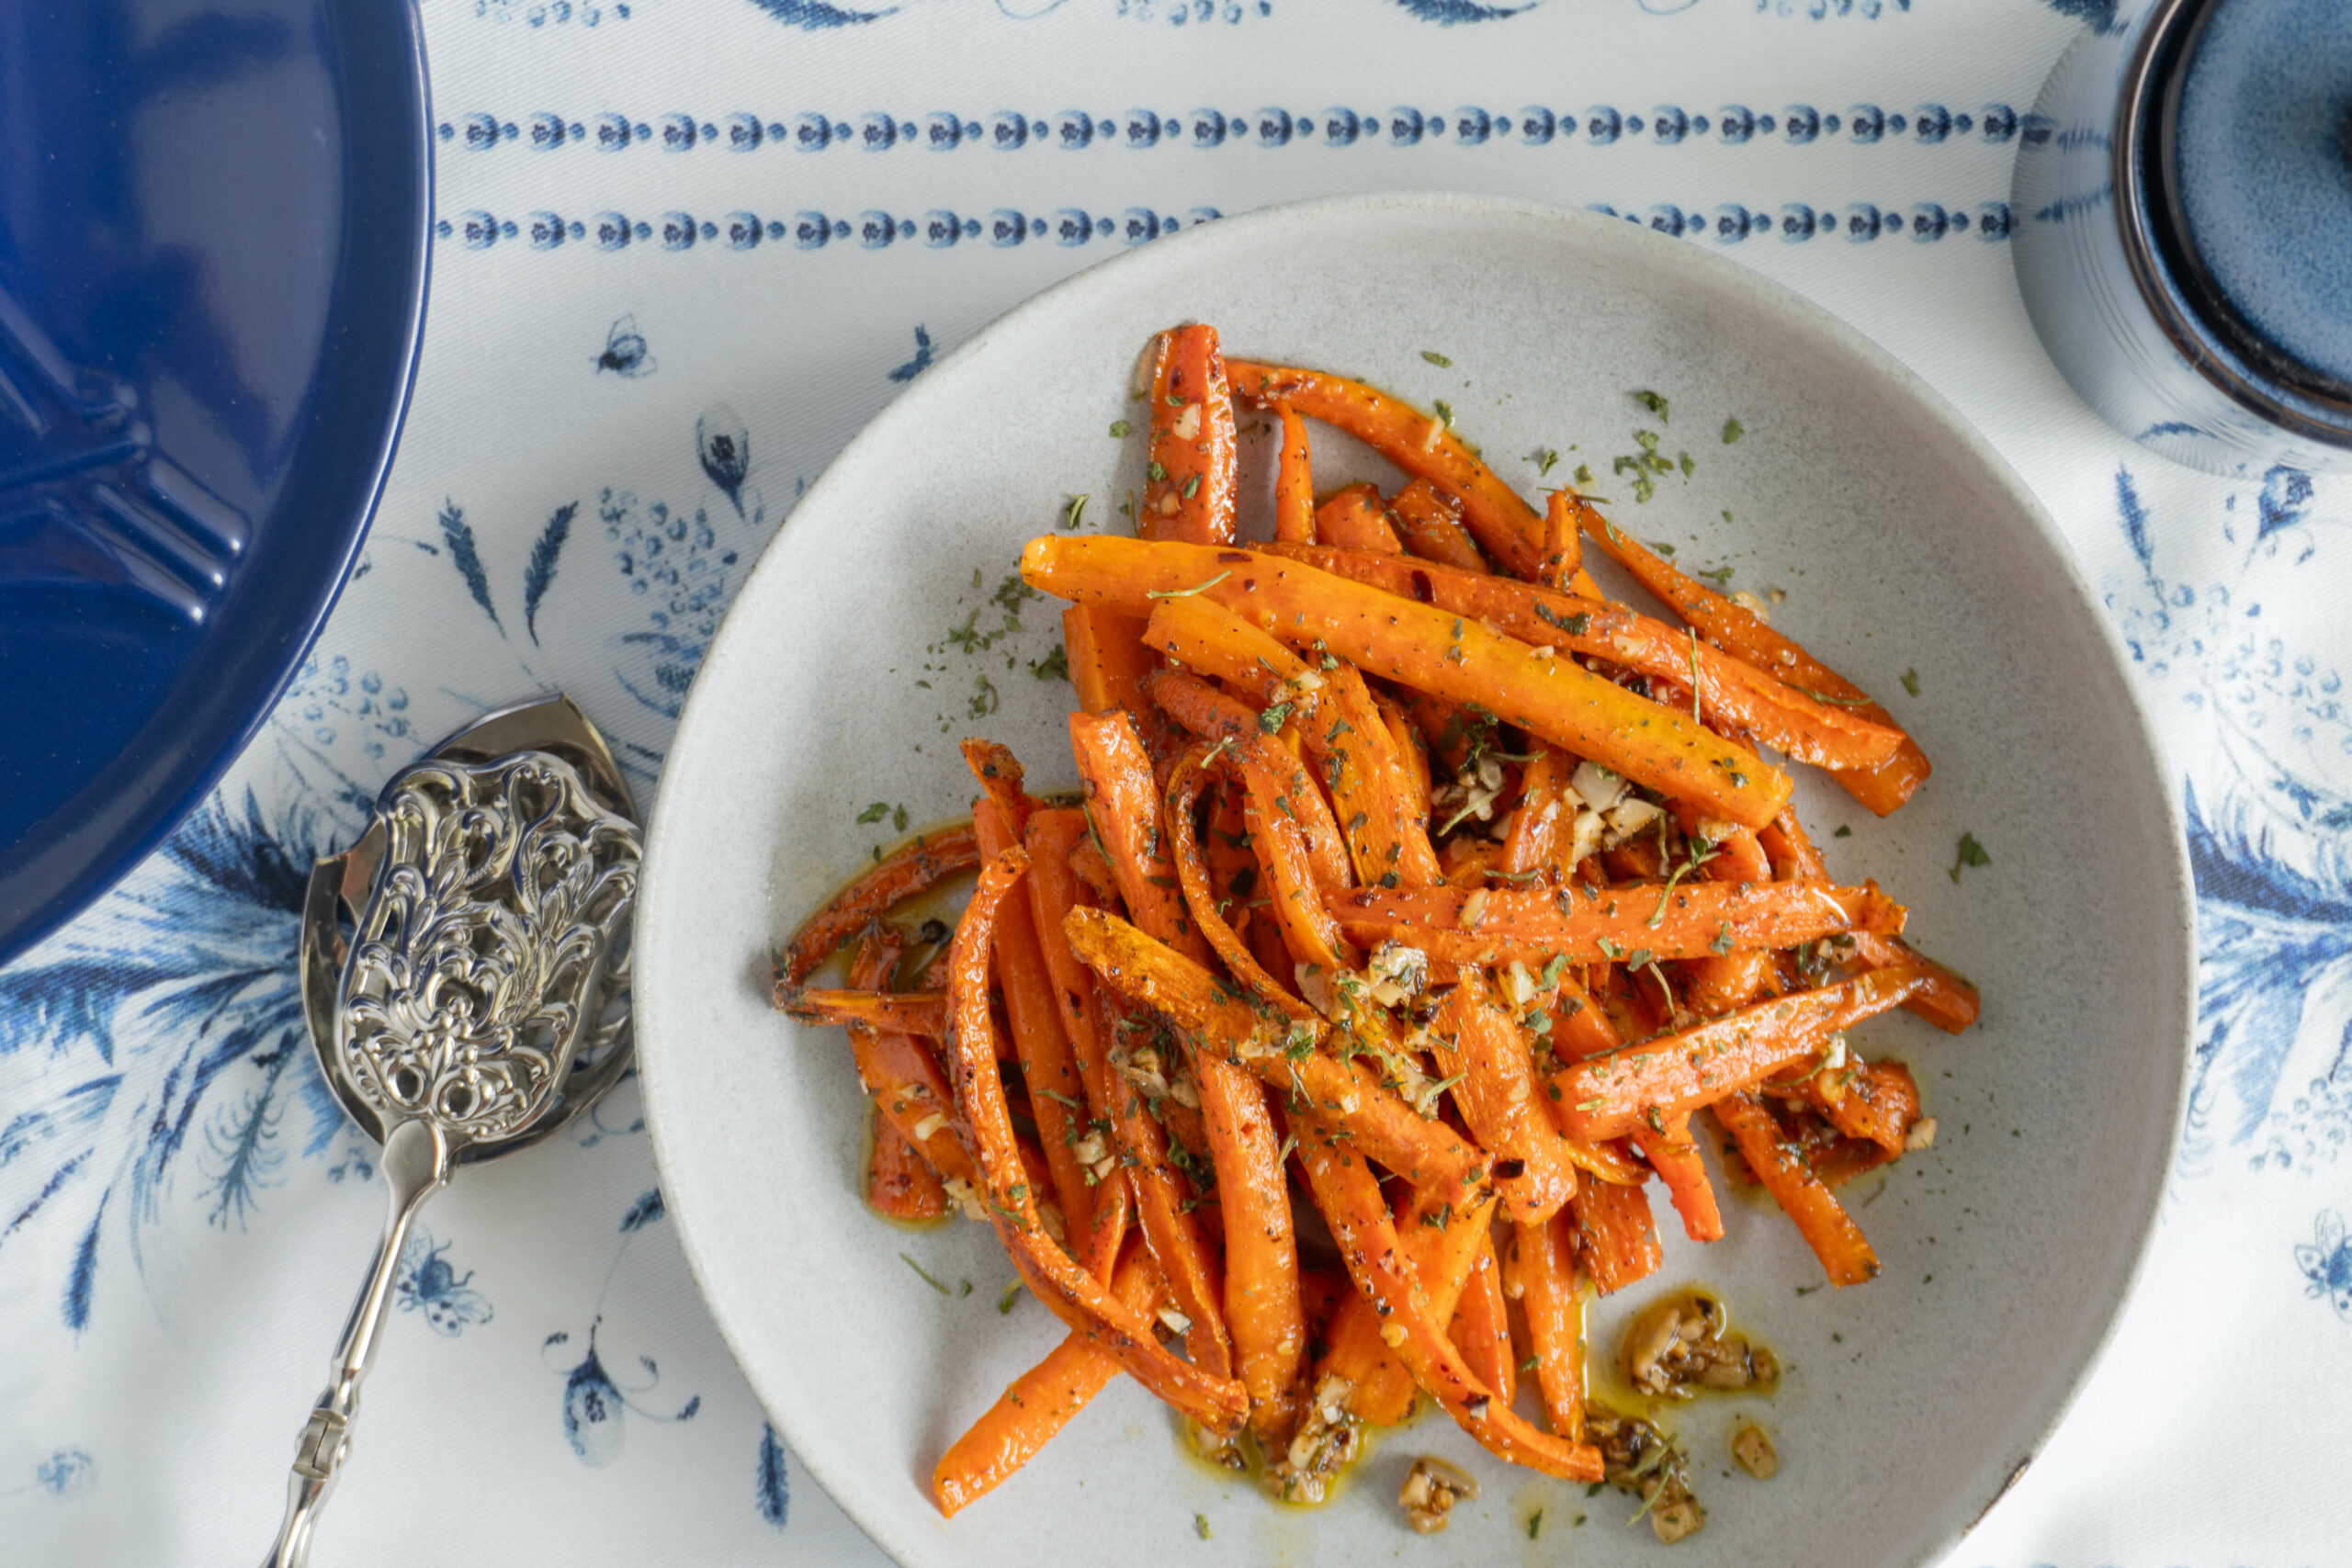 Black Pepper Roasted Carrots served and ready to eat